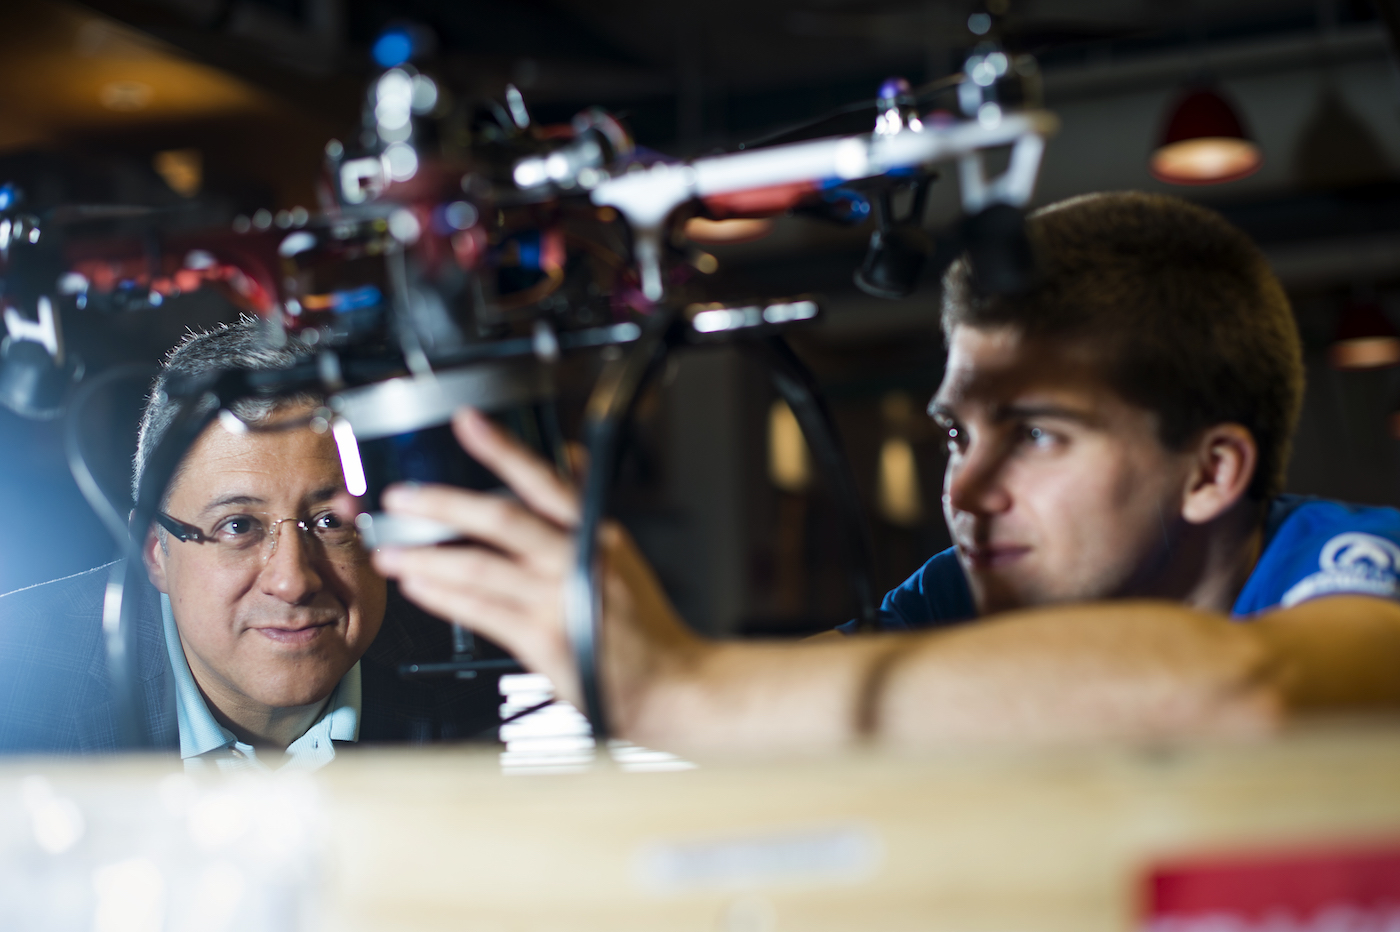 Taskin Padir and his student Nicolas Binford work on a hexi-copter drone. Padir's lab is developing aerial robots for damage detection after disasters. Photo by Adam Glanzman/Northeastern University